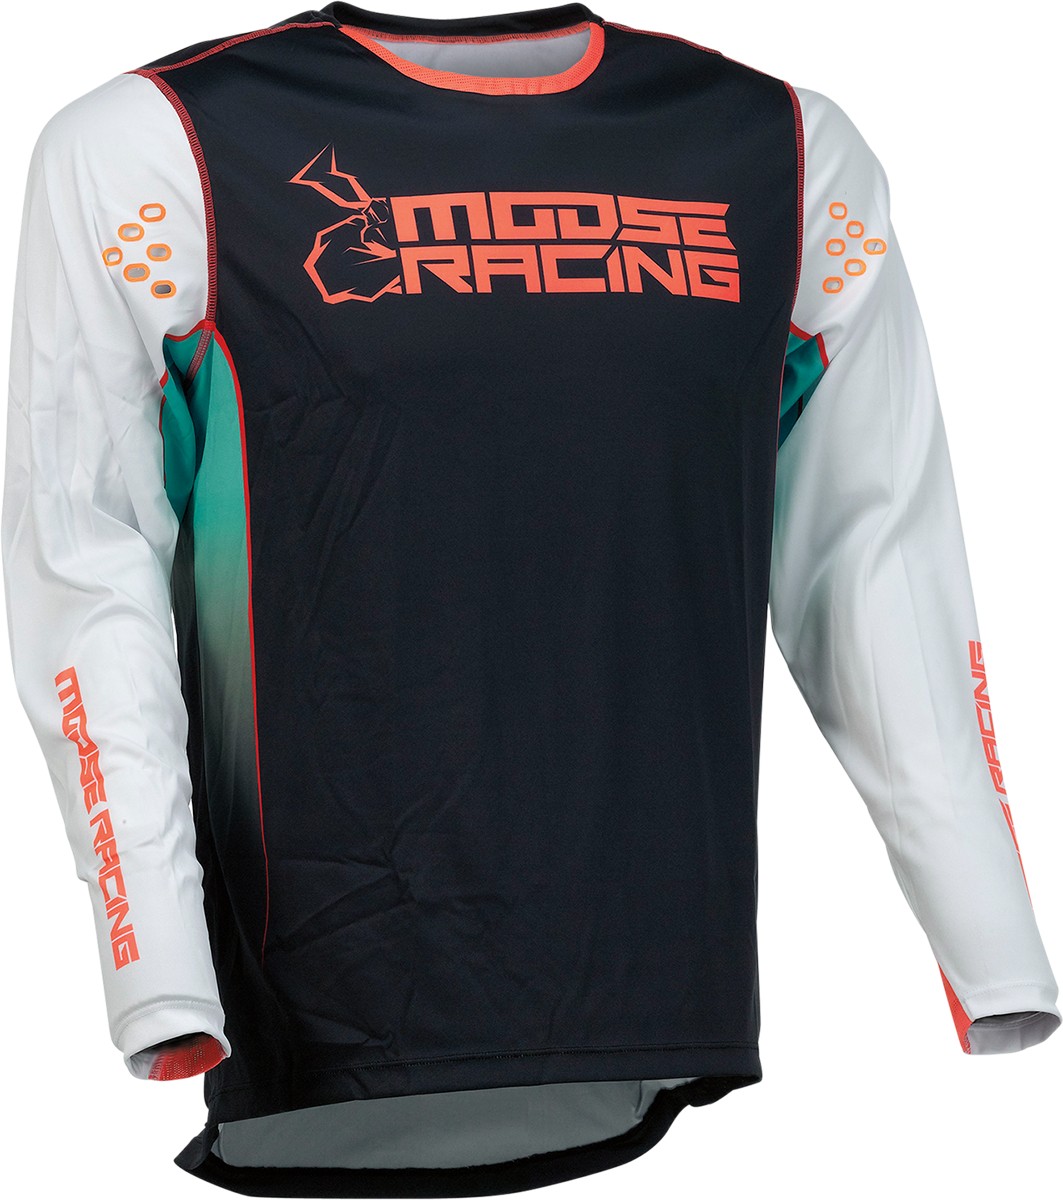 MOOSE RACING SOFT-GOODS - JERSEY AGROID TL/BK MD